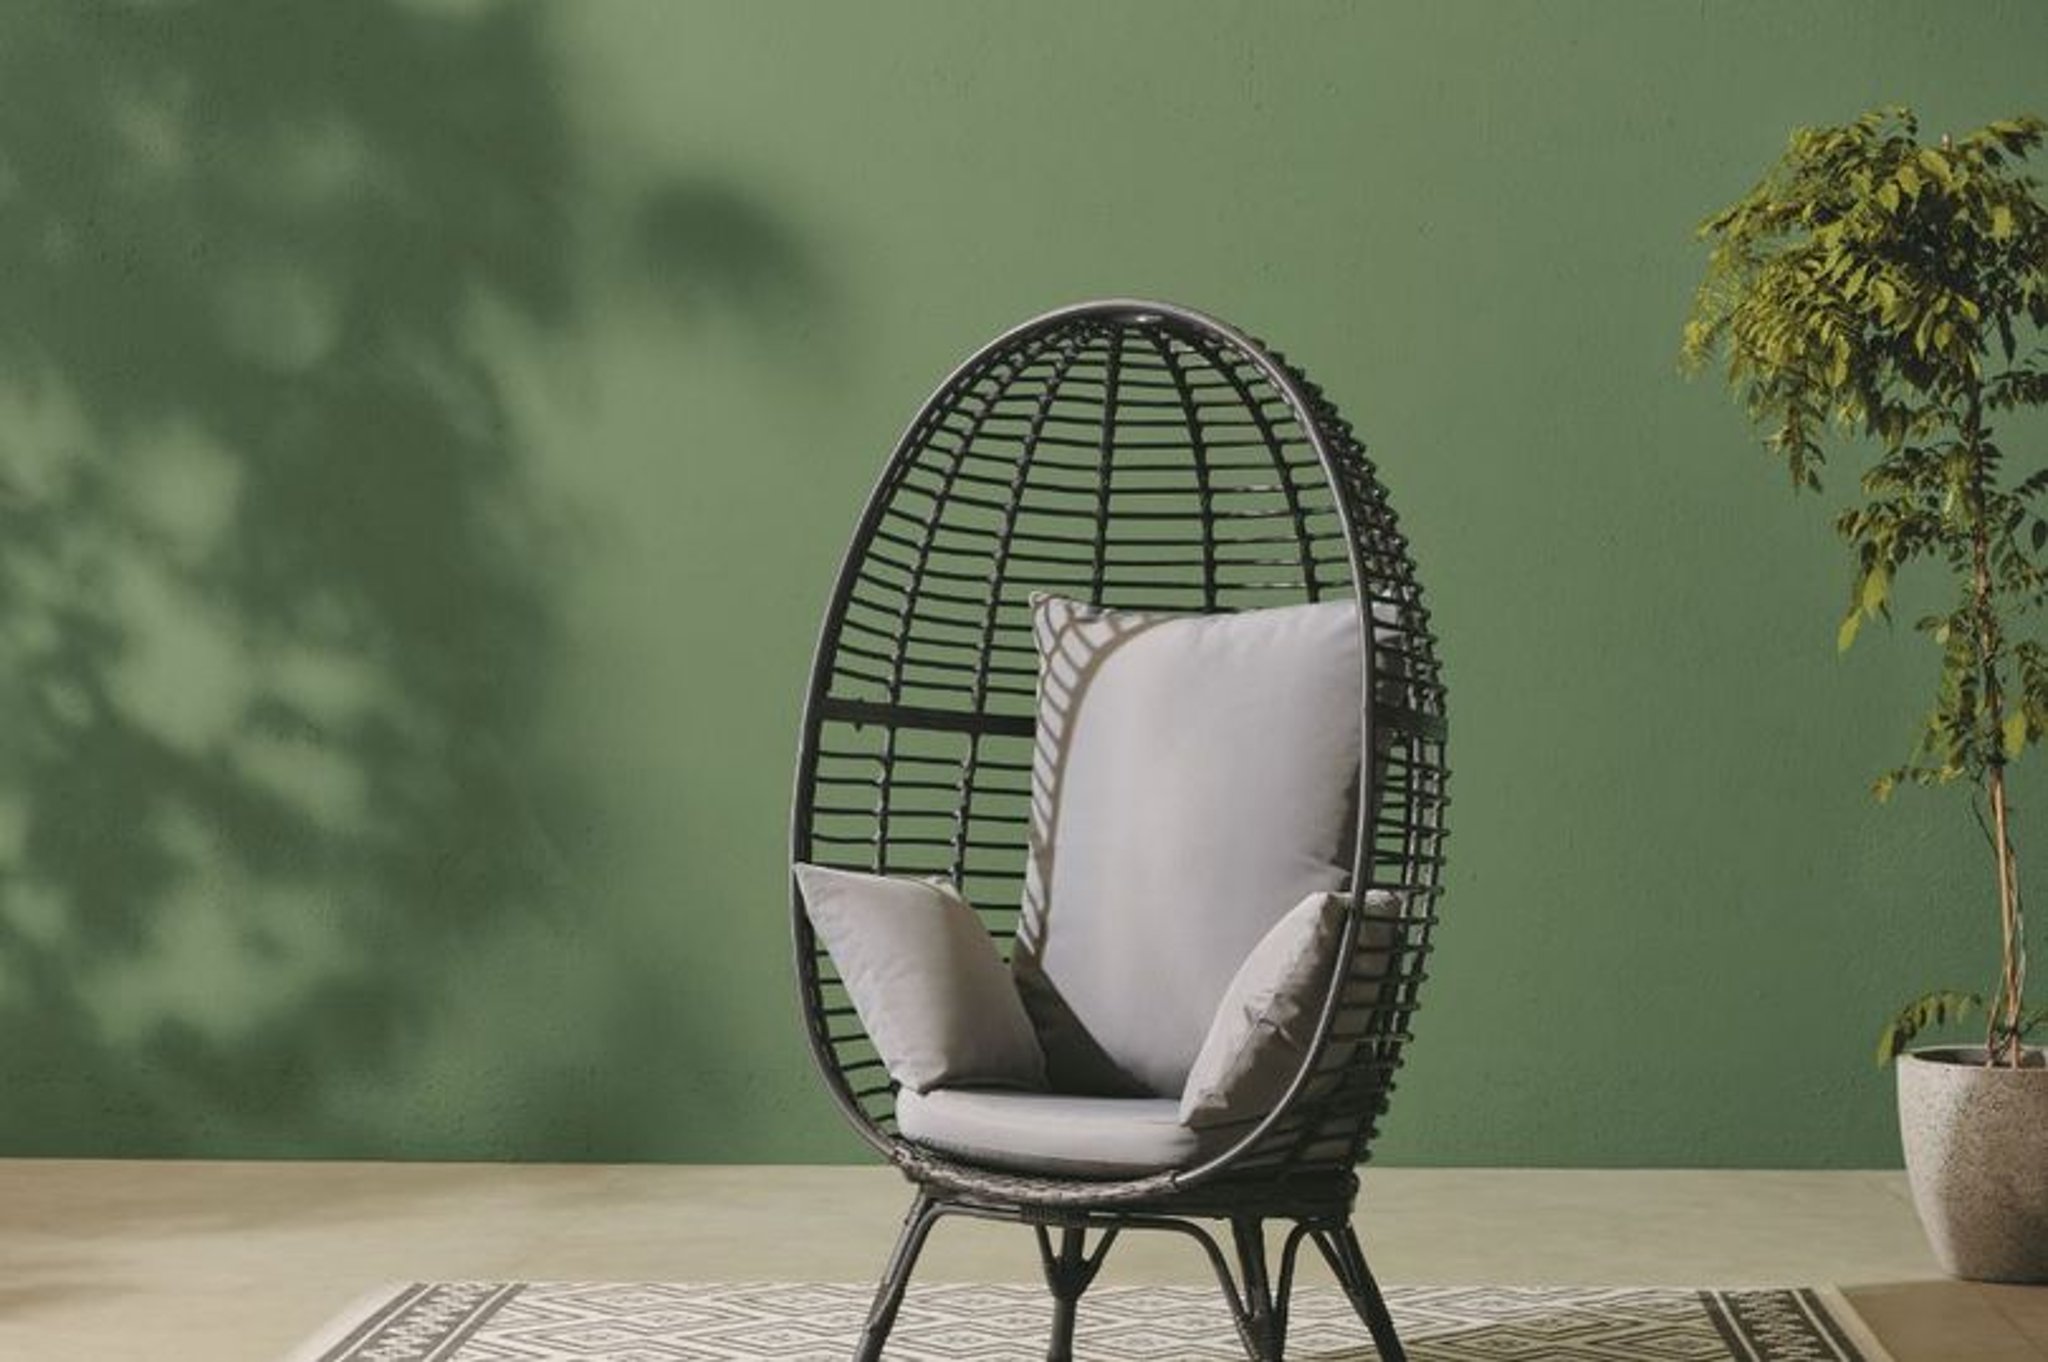 Tesco Is Selling Its Own Version Of Aldi S Hanging Egg Chair And There S Only 1 Difference In Price Nationalworld